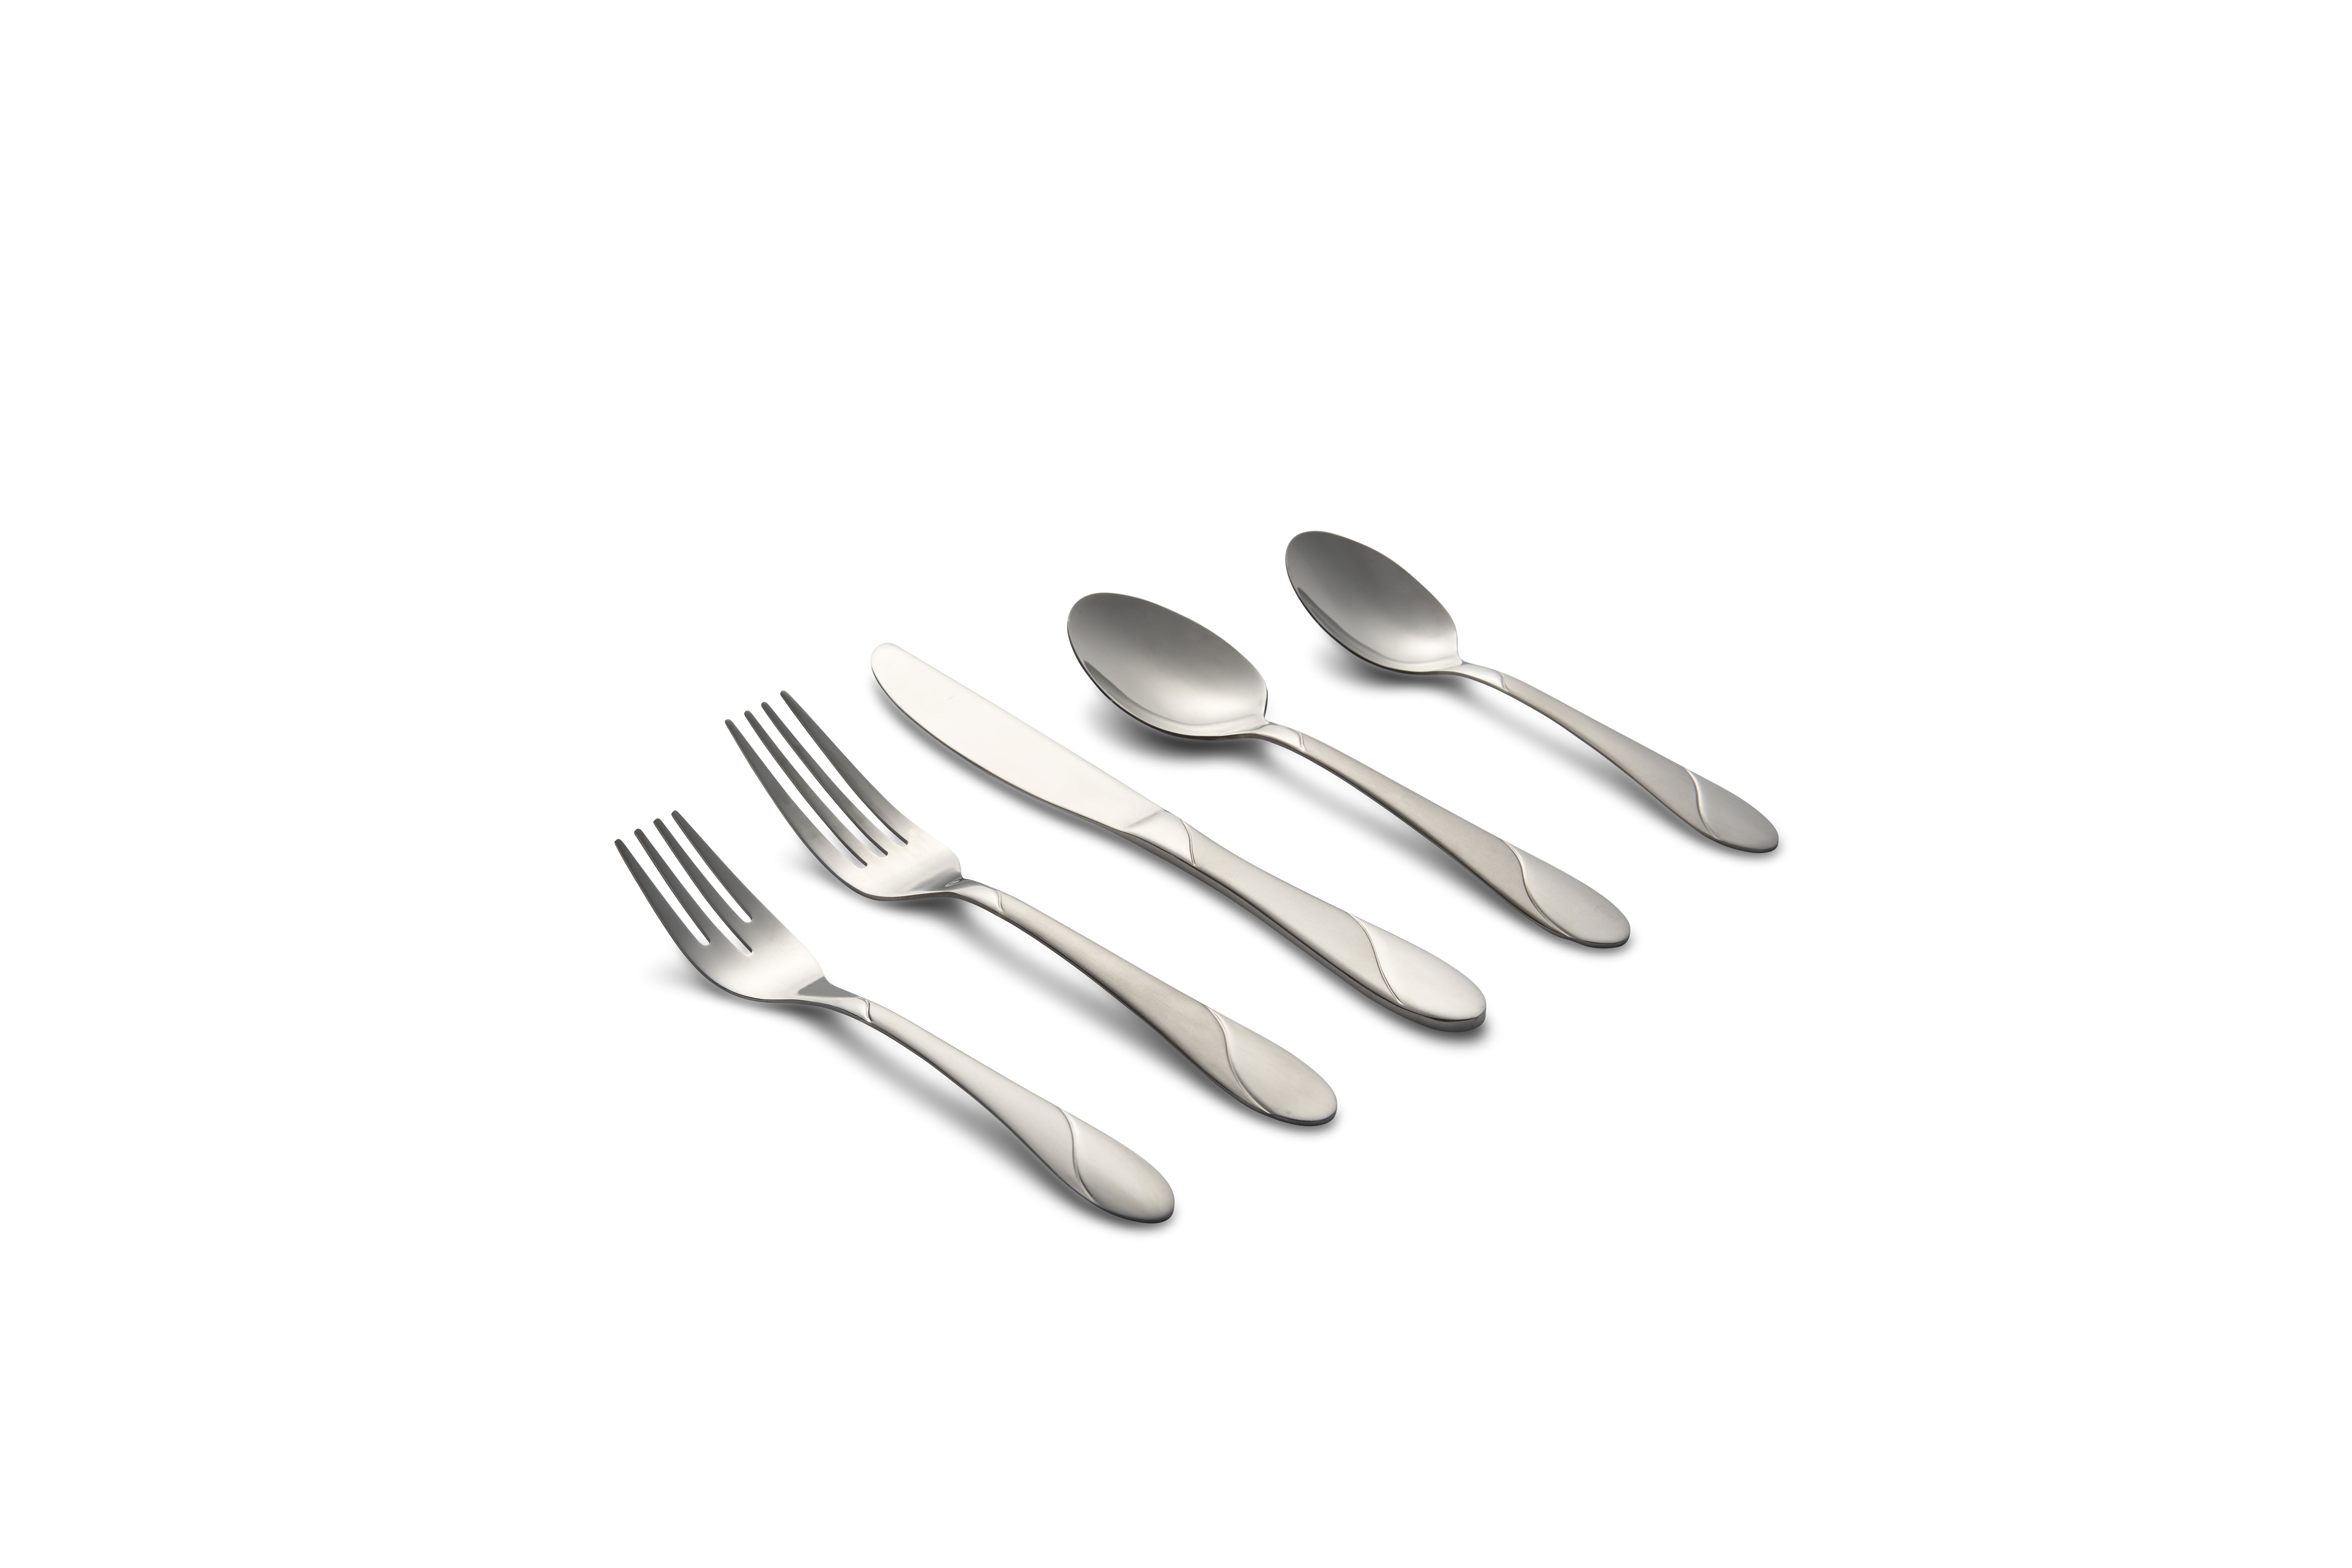 BRIIEC Matte Silver Silverware Set Satin Finish 36-Piece Stainless Steel Flatware Set with Flat Handle Include coffee spoon Kitchen Utensil Set Service for 6